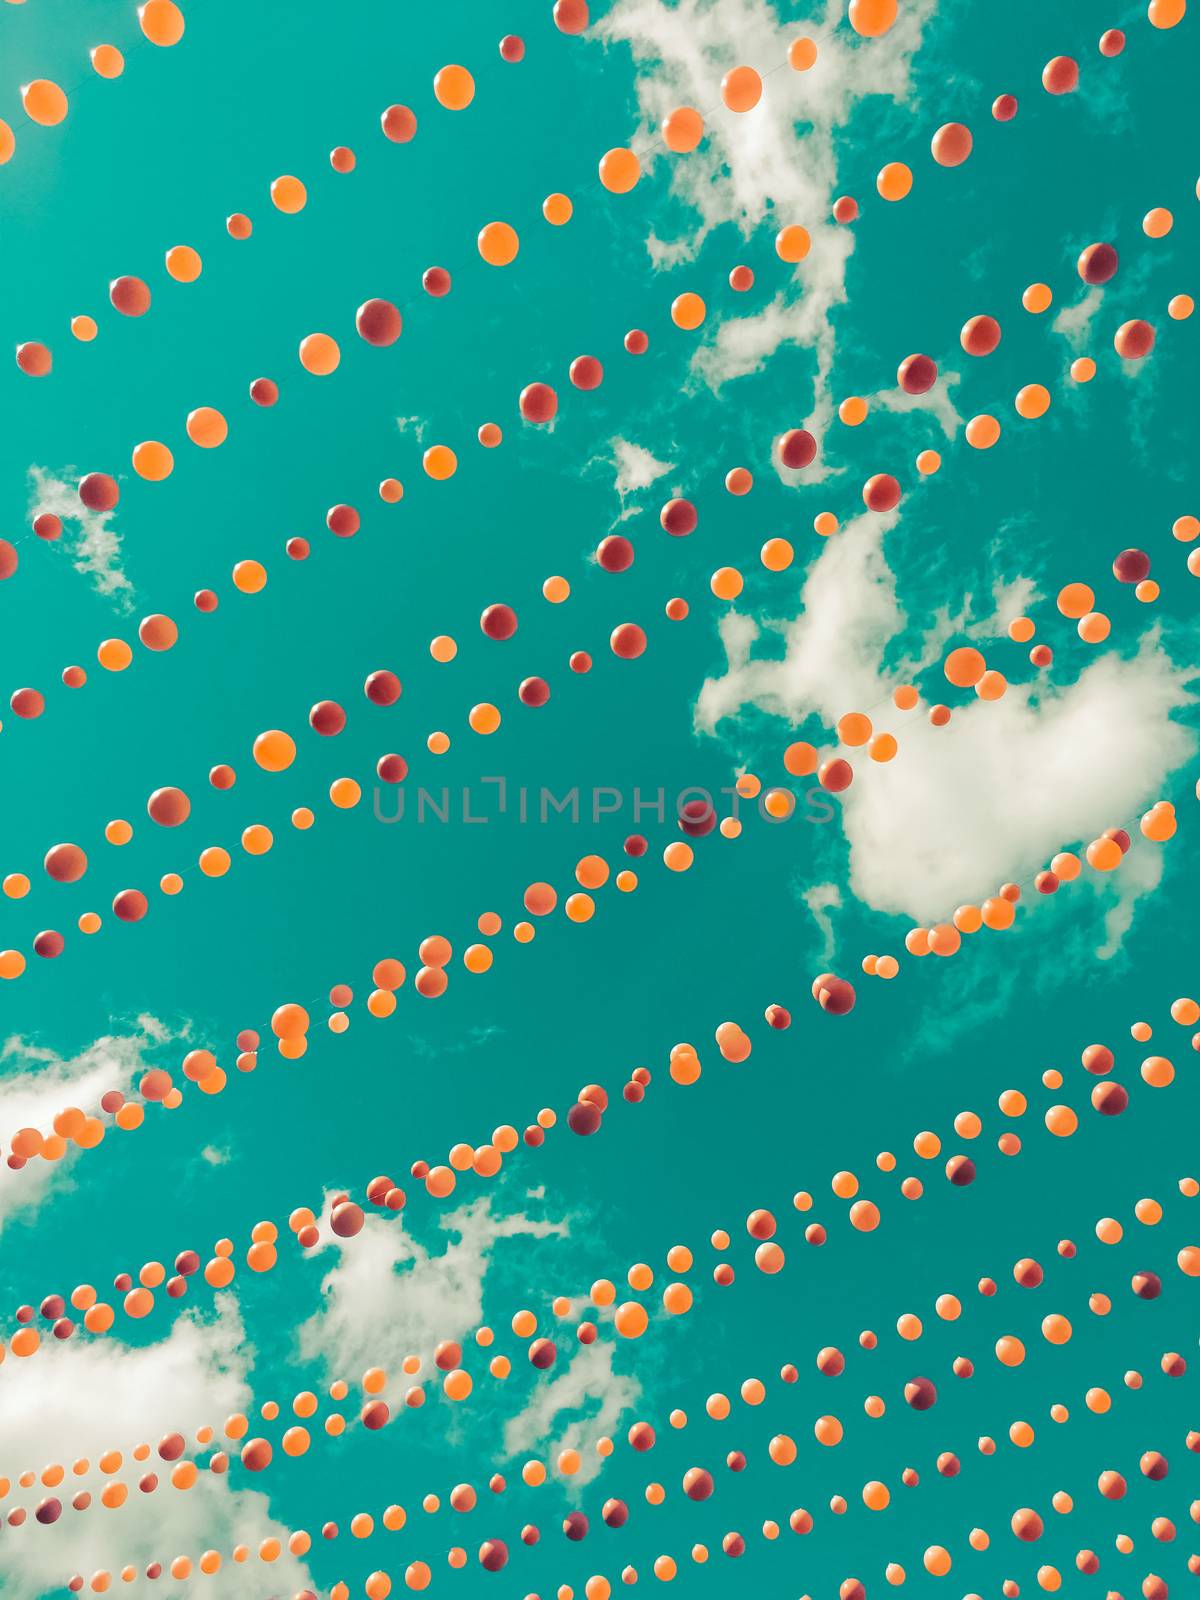 Vintage style image of colorful balls decoration against sky and clouds. Ste-Catherine street, gay village neighborhood in Montreal (Quebec, Canada).